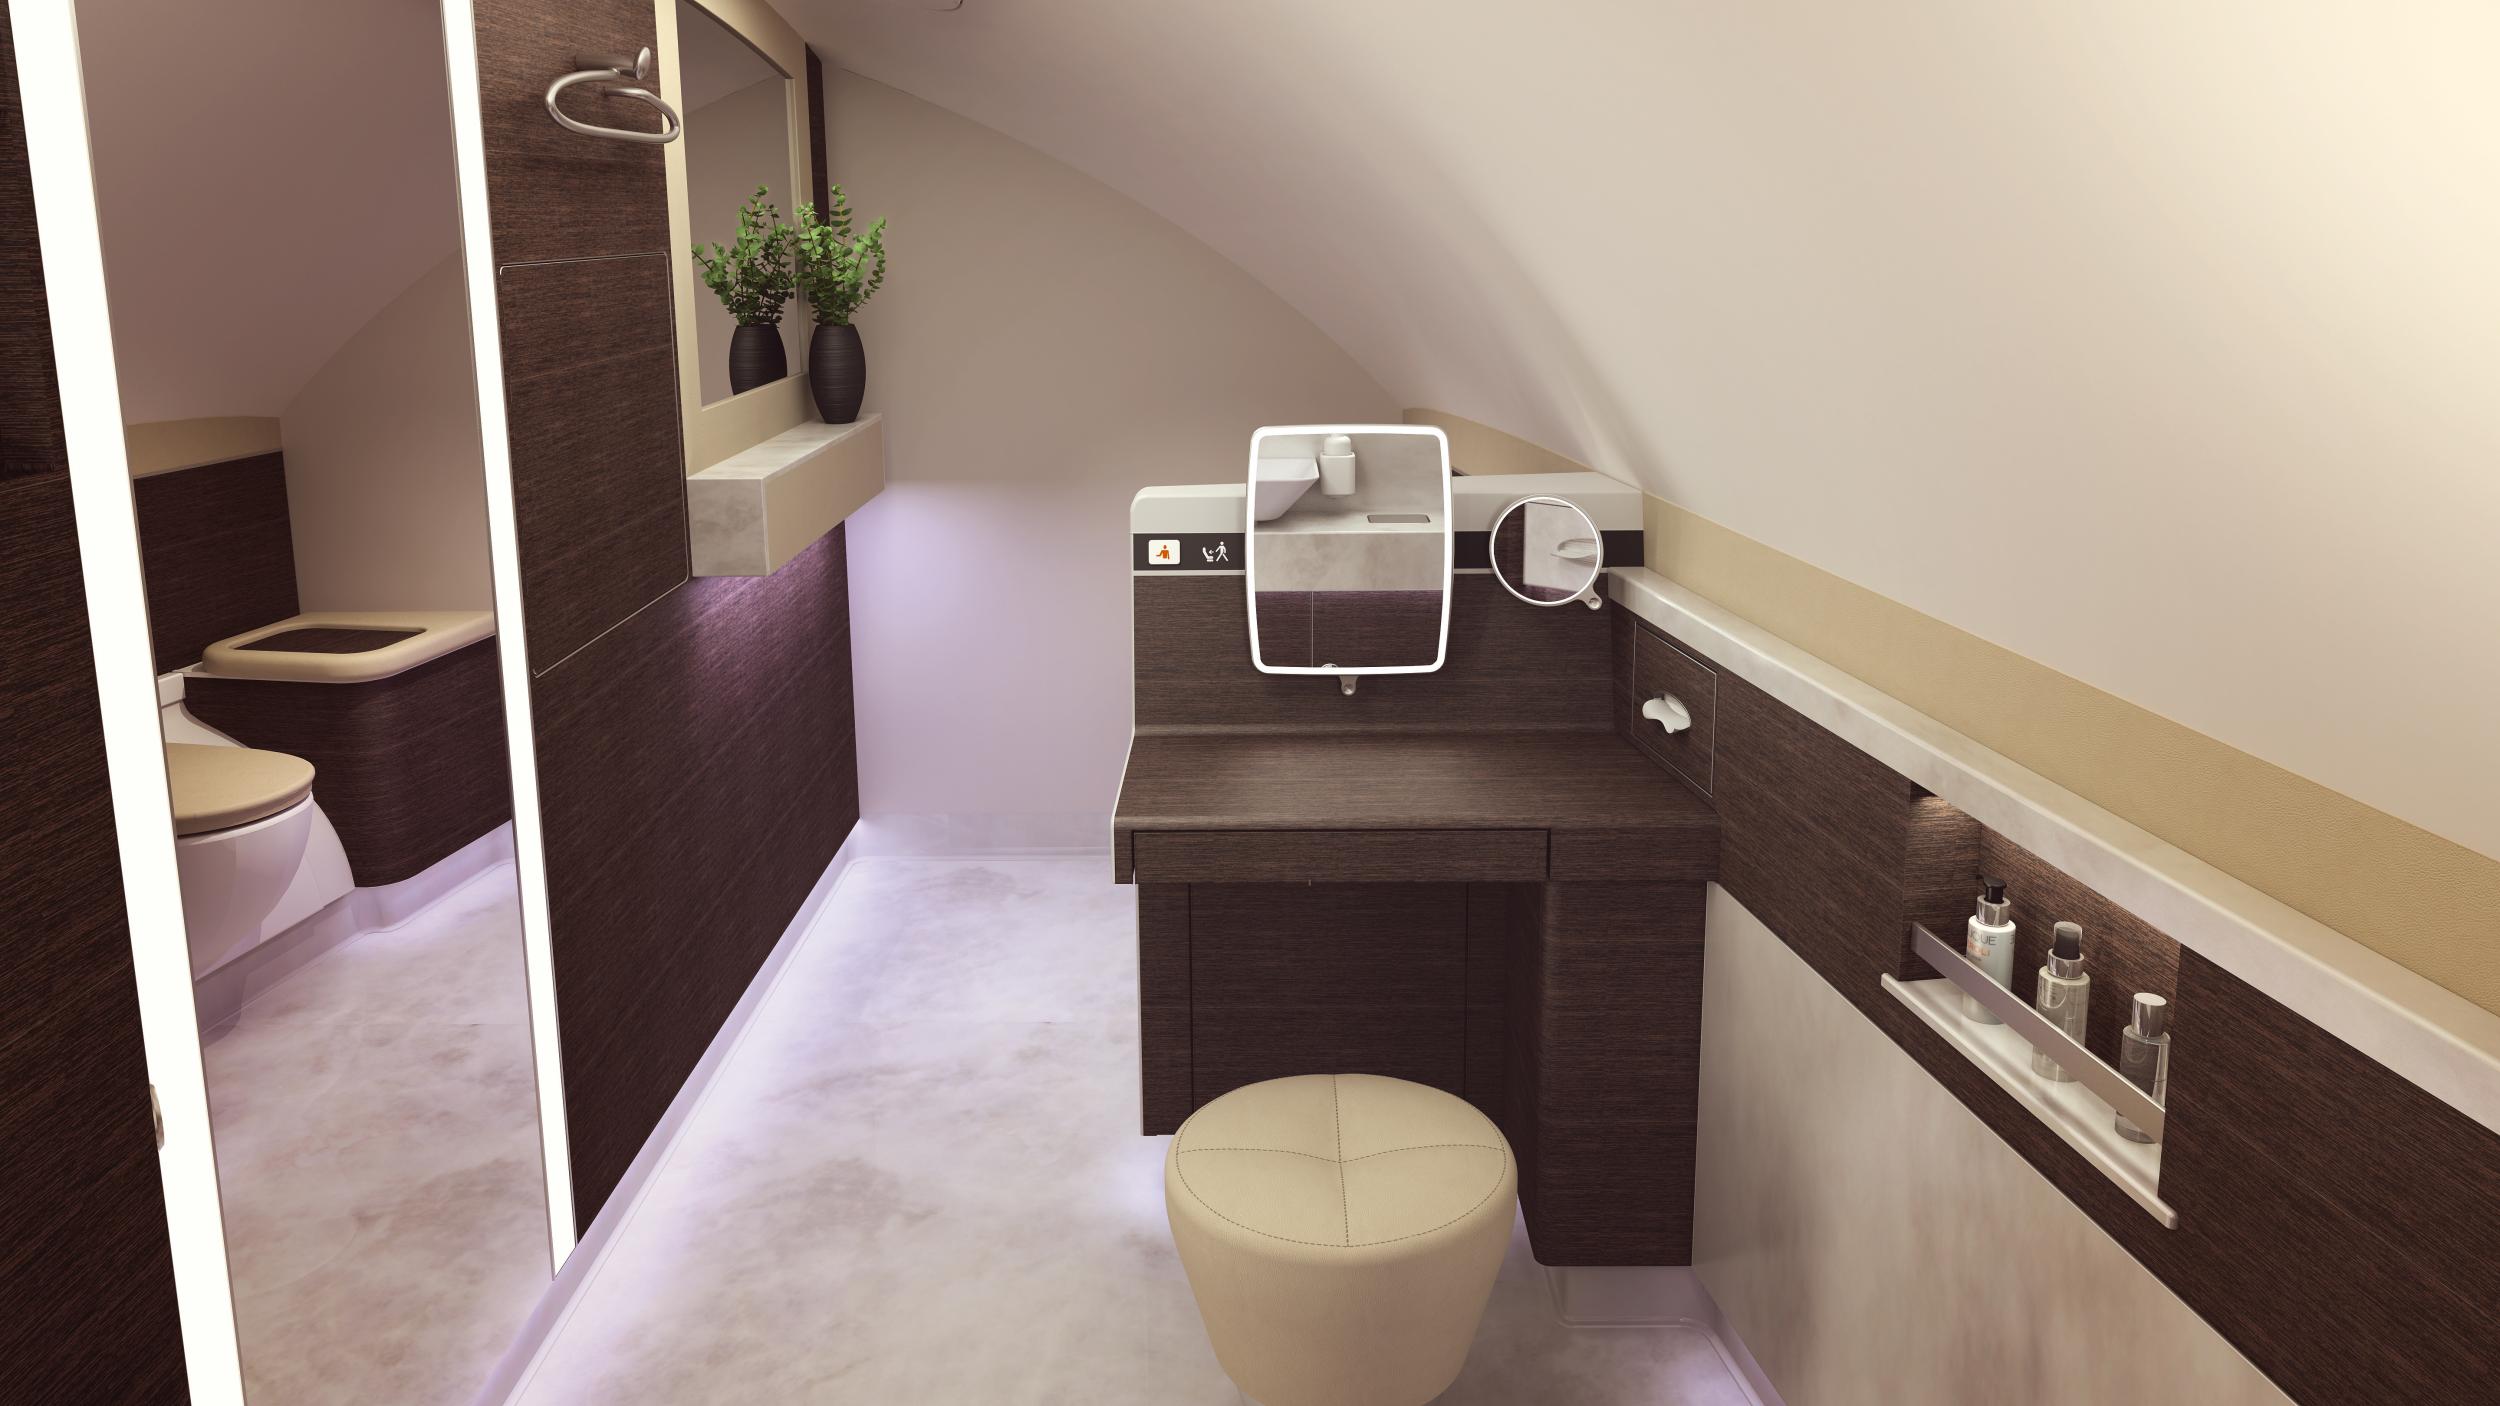 The suites feature a sit-down vanity mirror